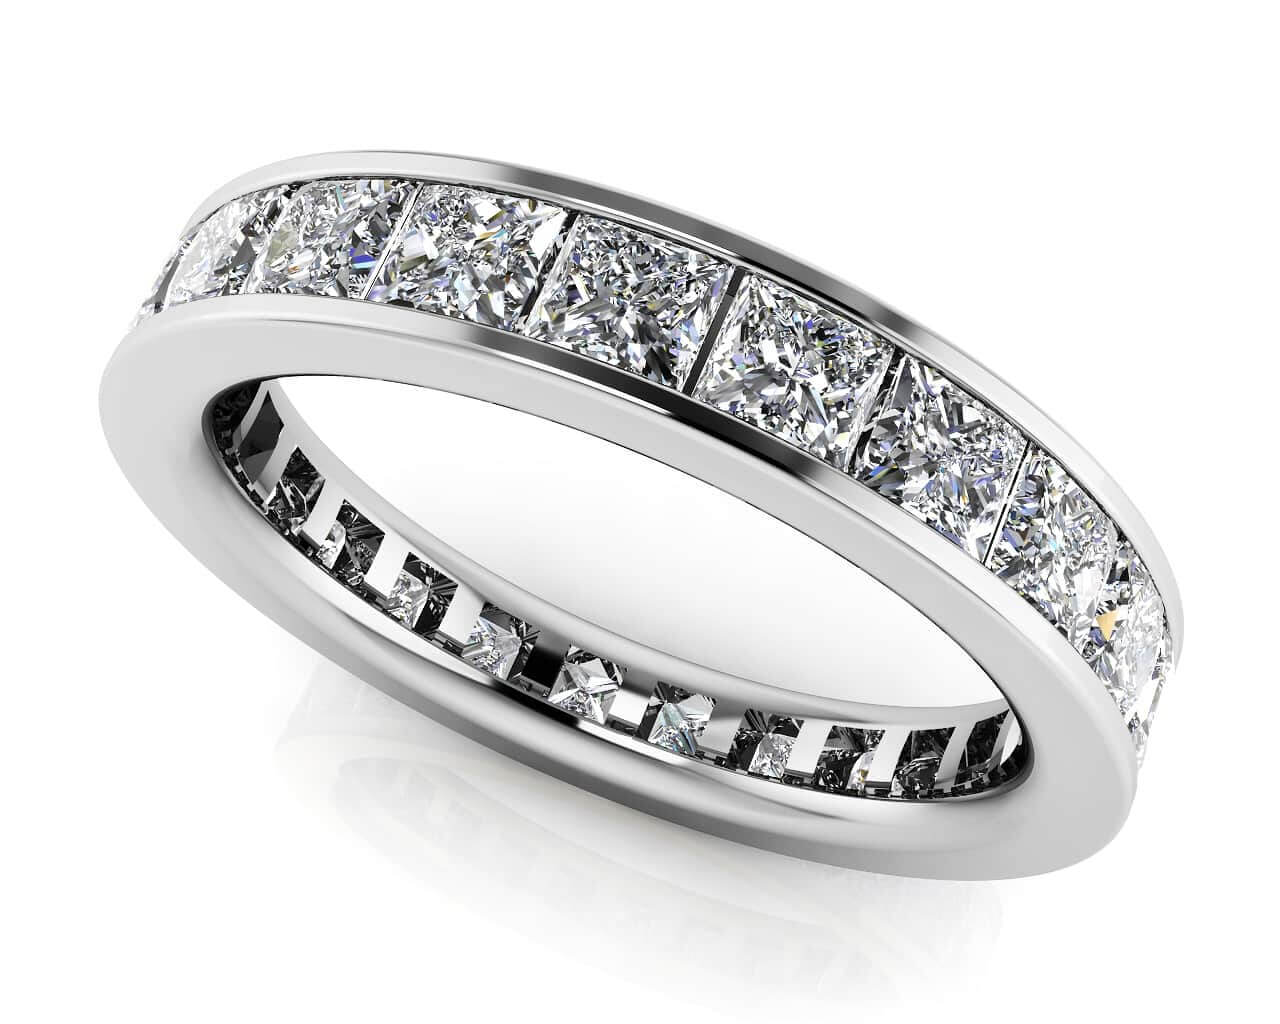 Channel Set Princess Diamond Eternity Band Available In Gold Or Platinum